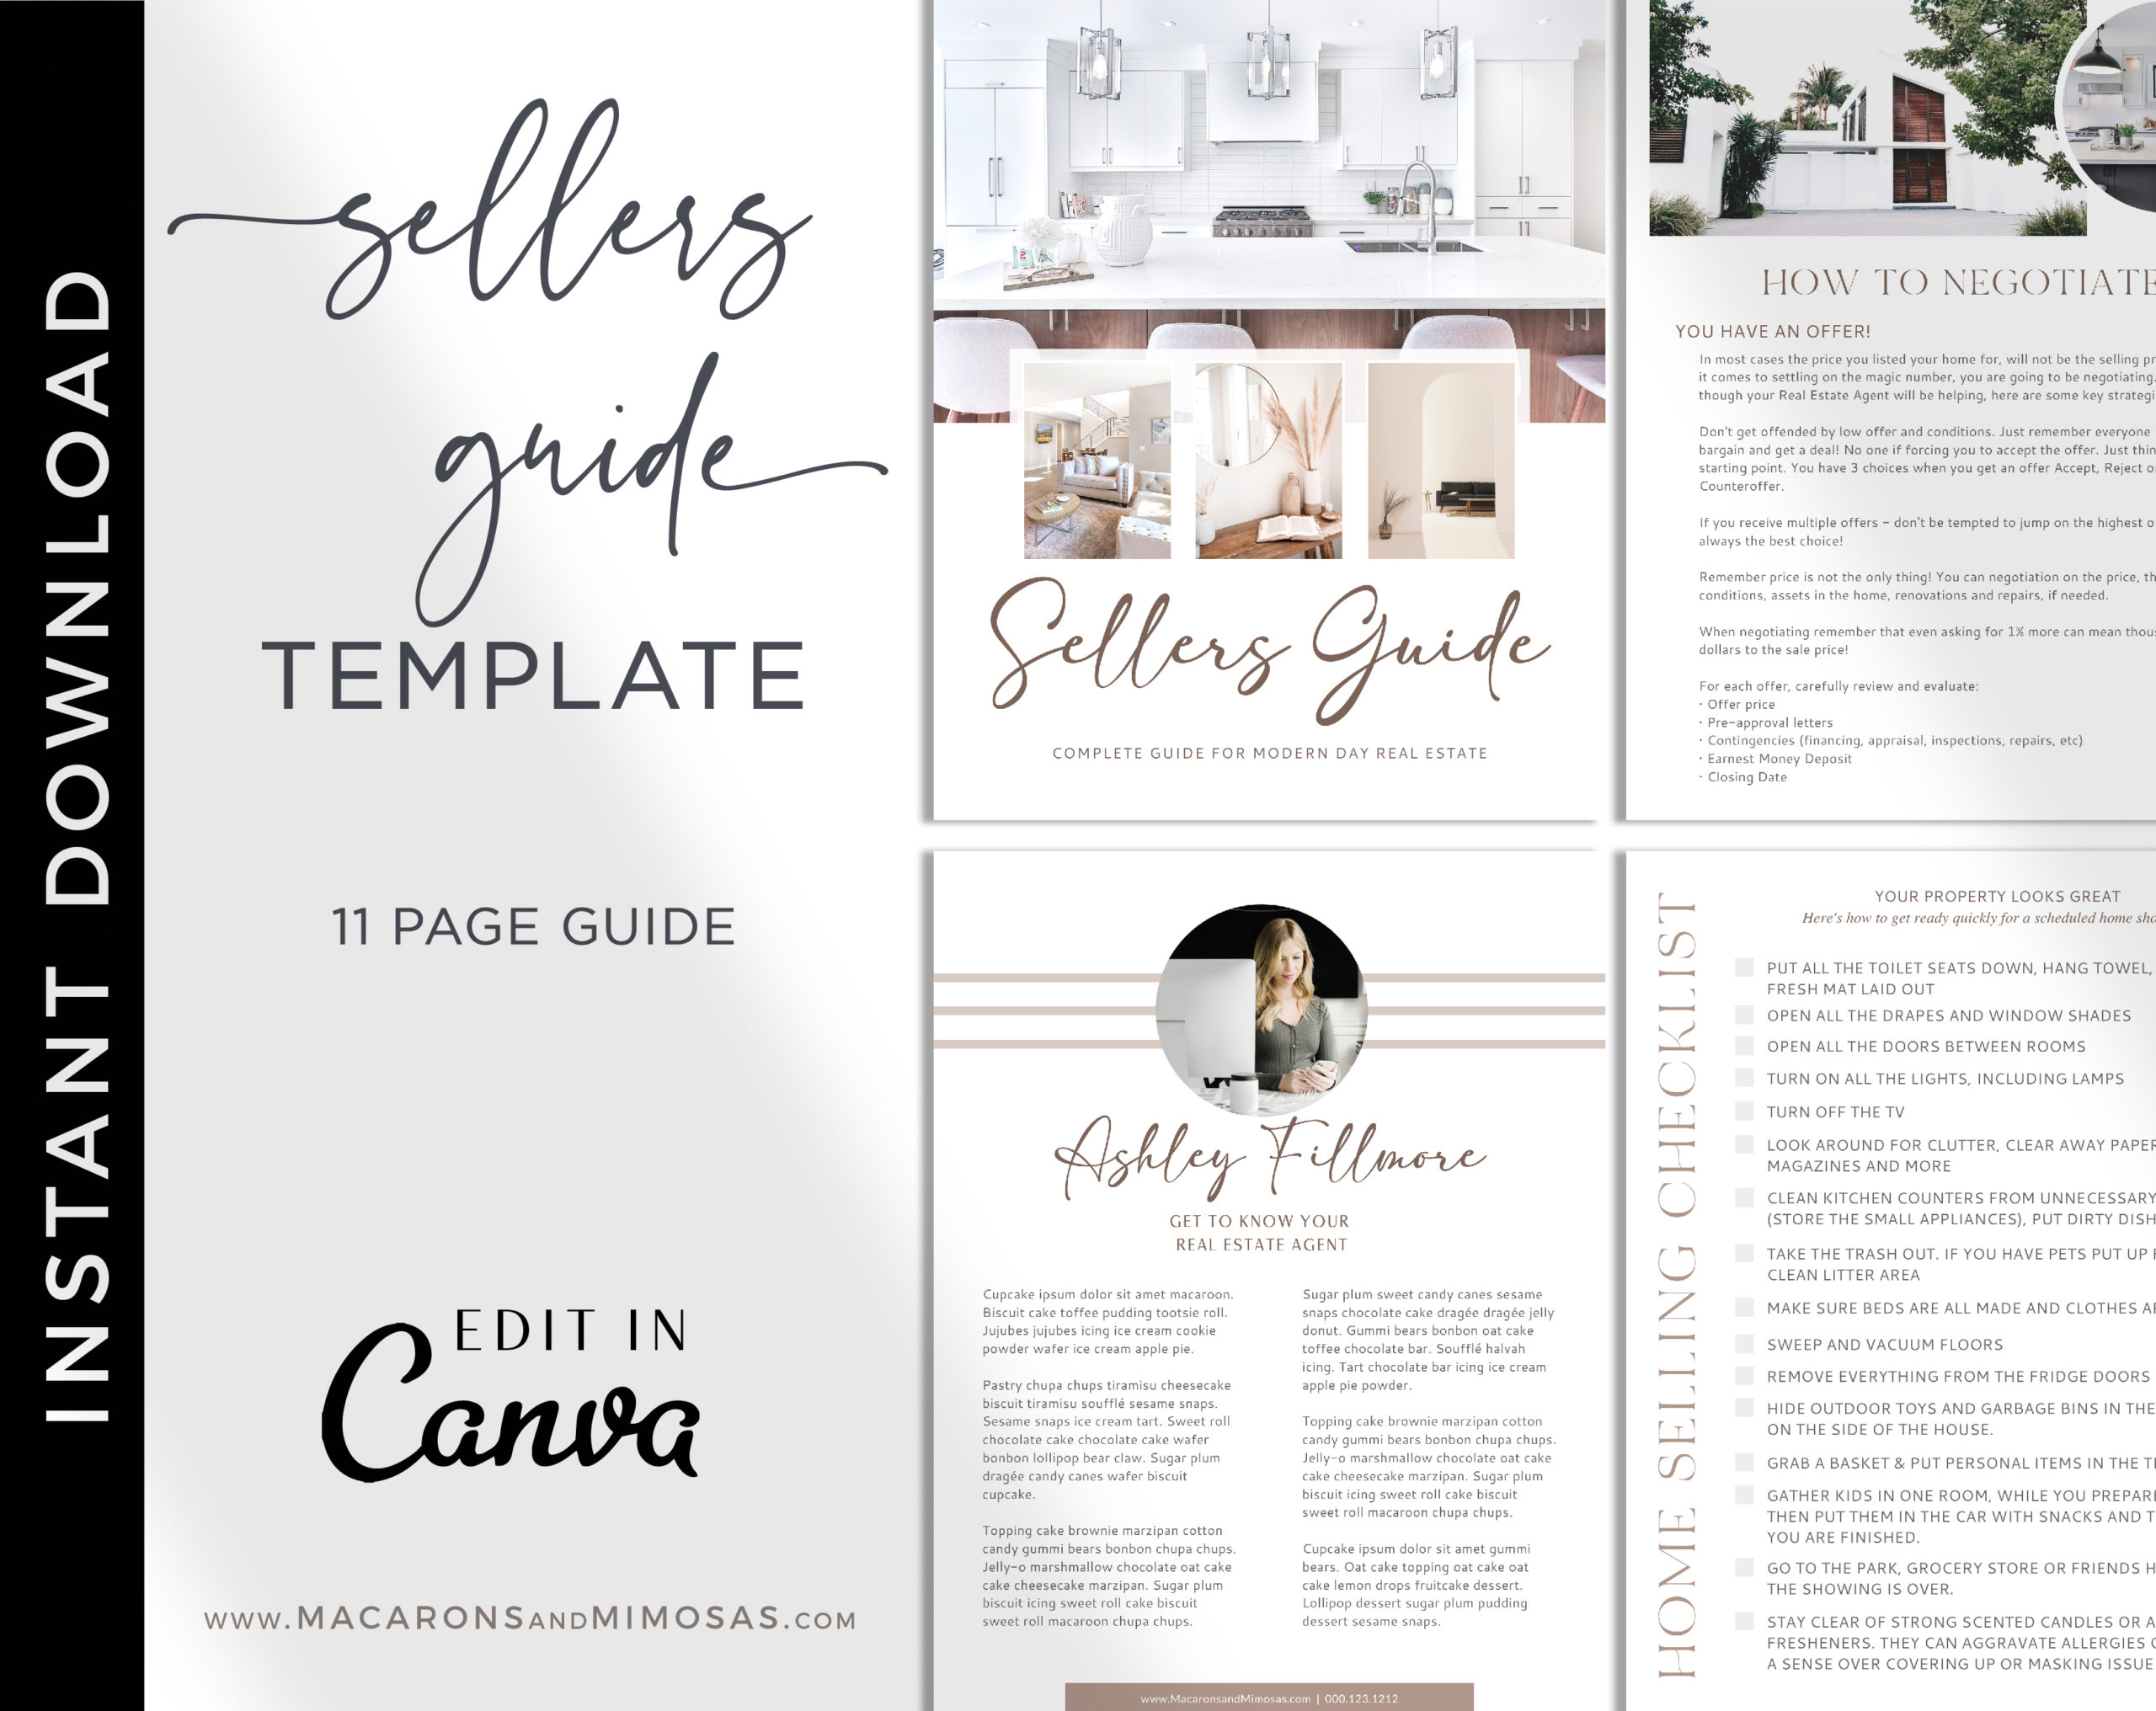 home-sellers-guide-template-for-canva-macarons-and-mimosas